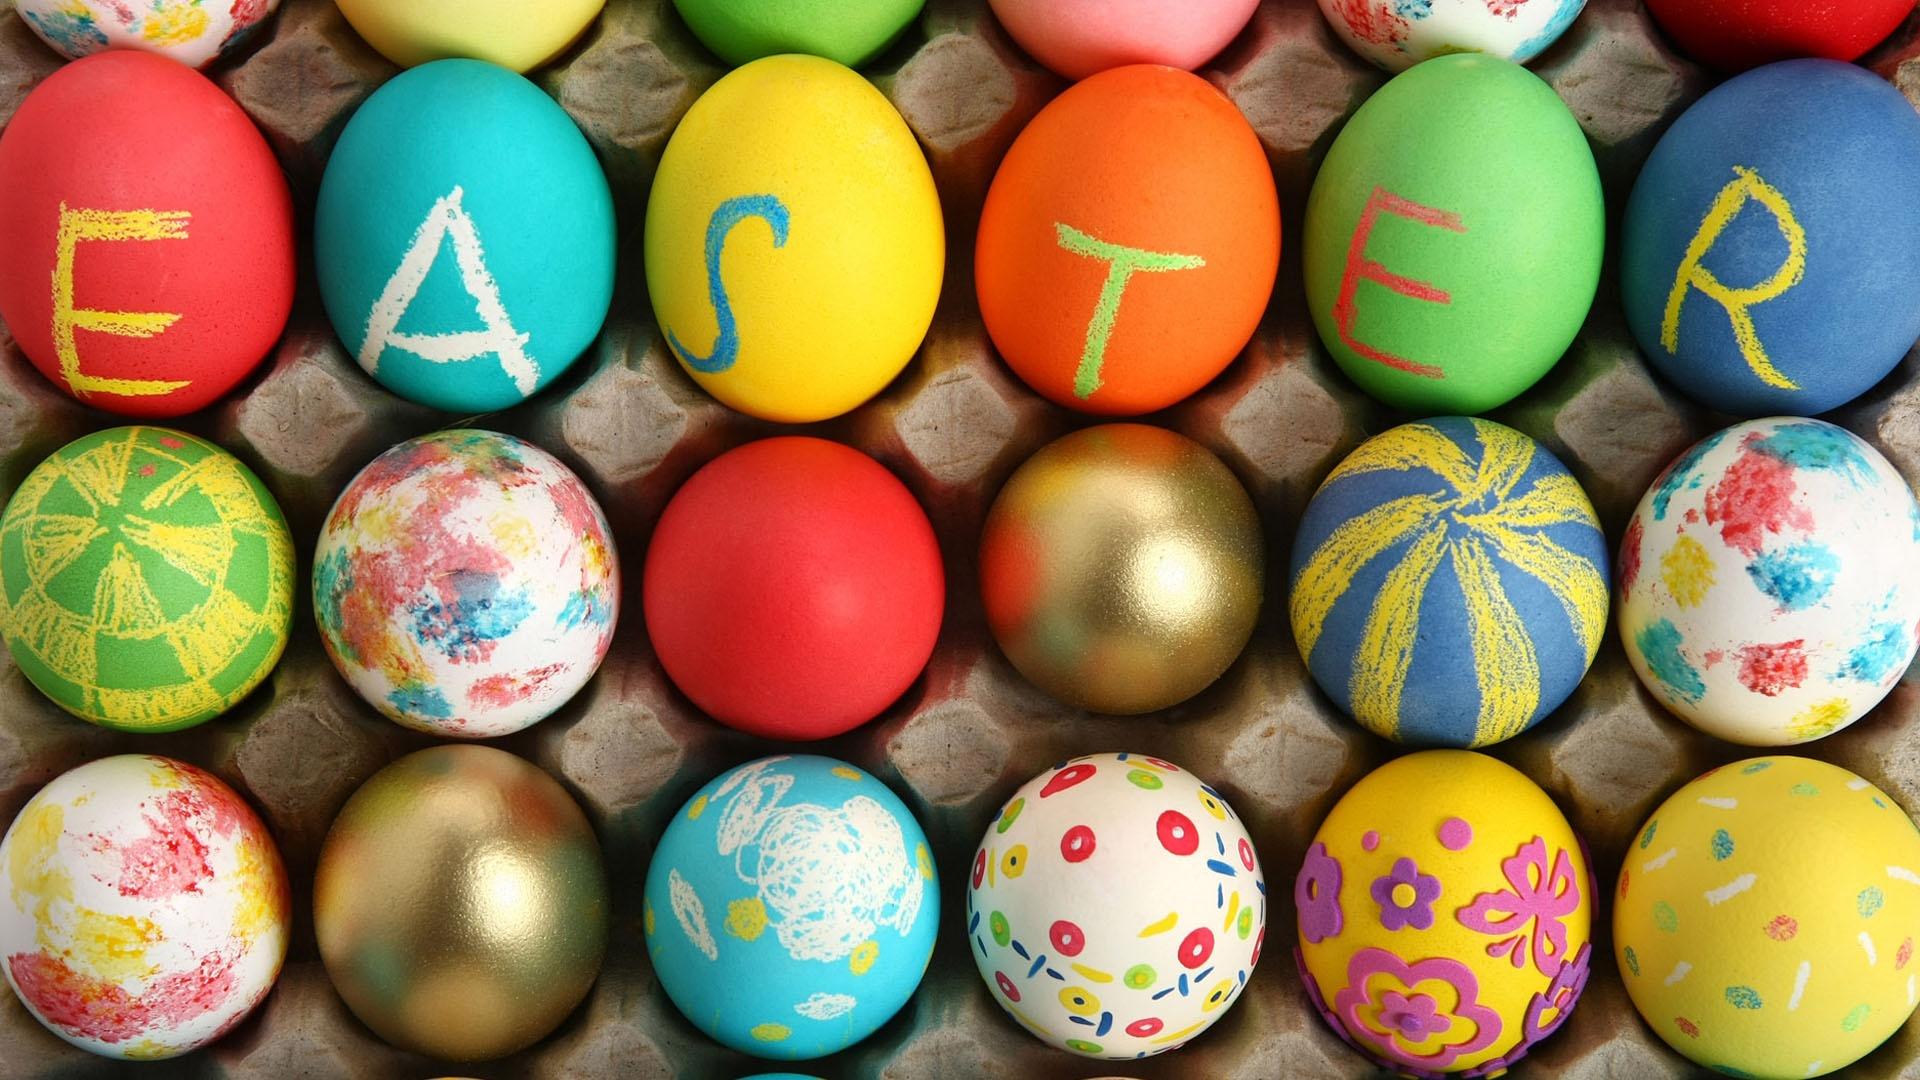 Shopping hours extended ahead of Easter, starting on Thursday – dailyhellas.com